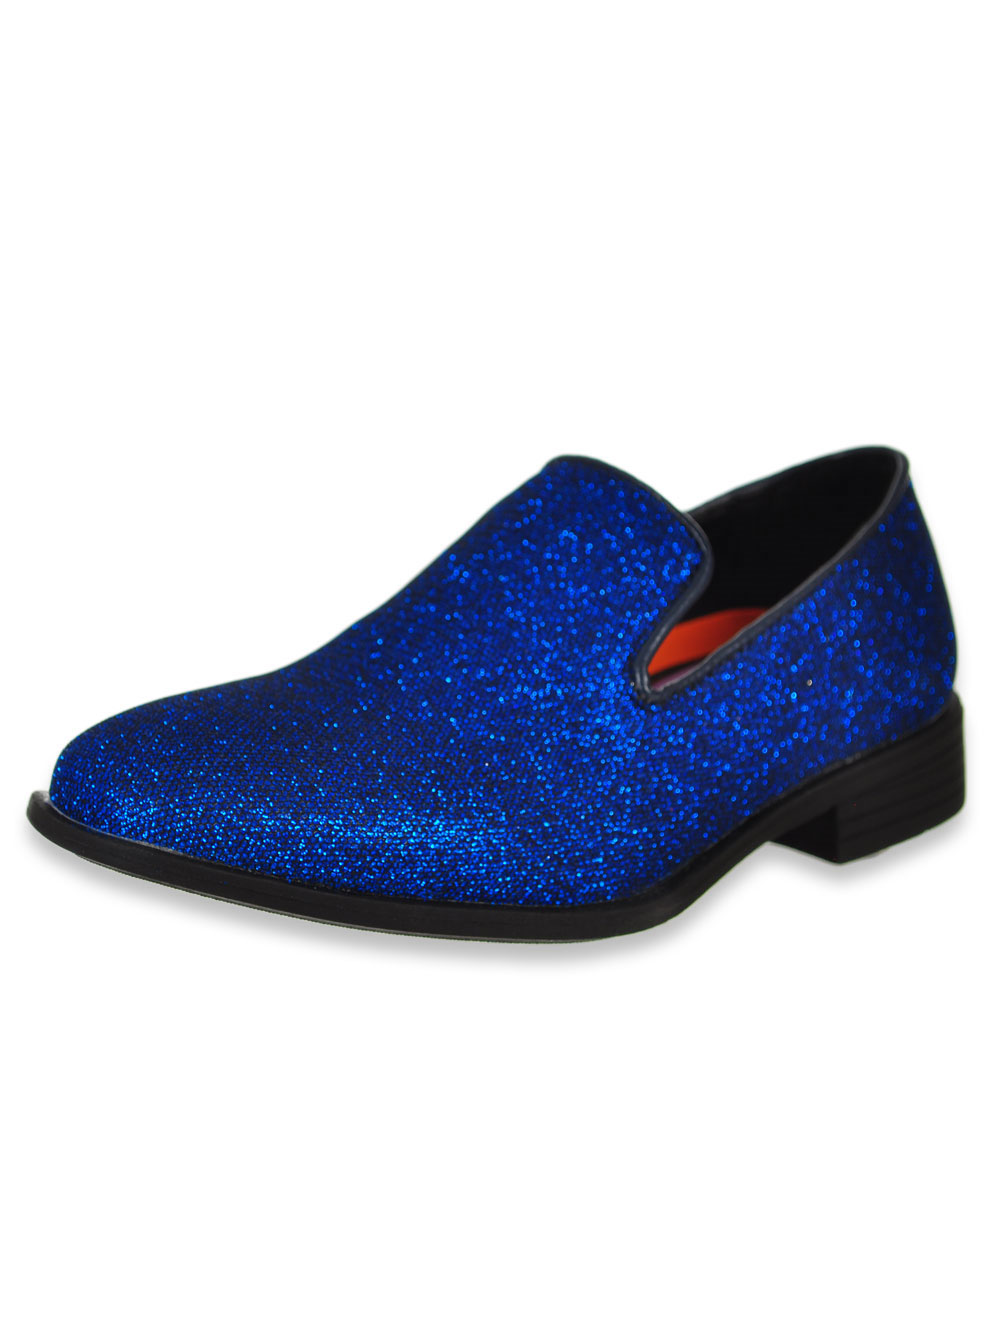 royal blue dress shoes for toddlers